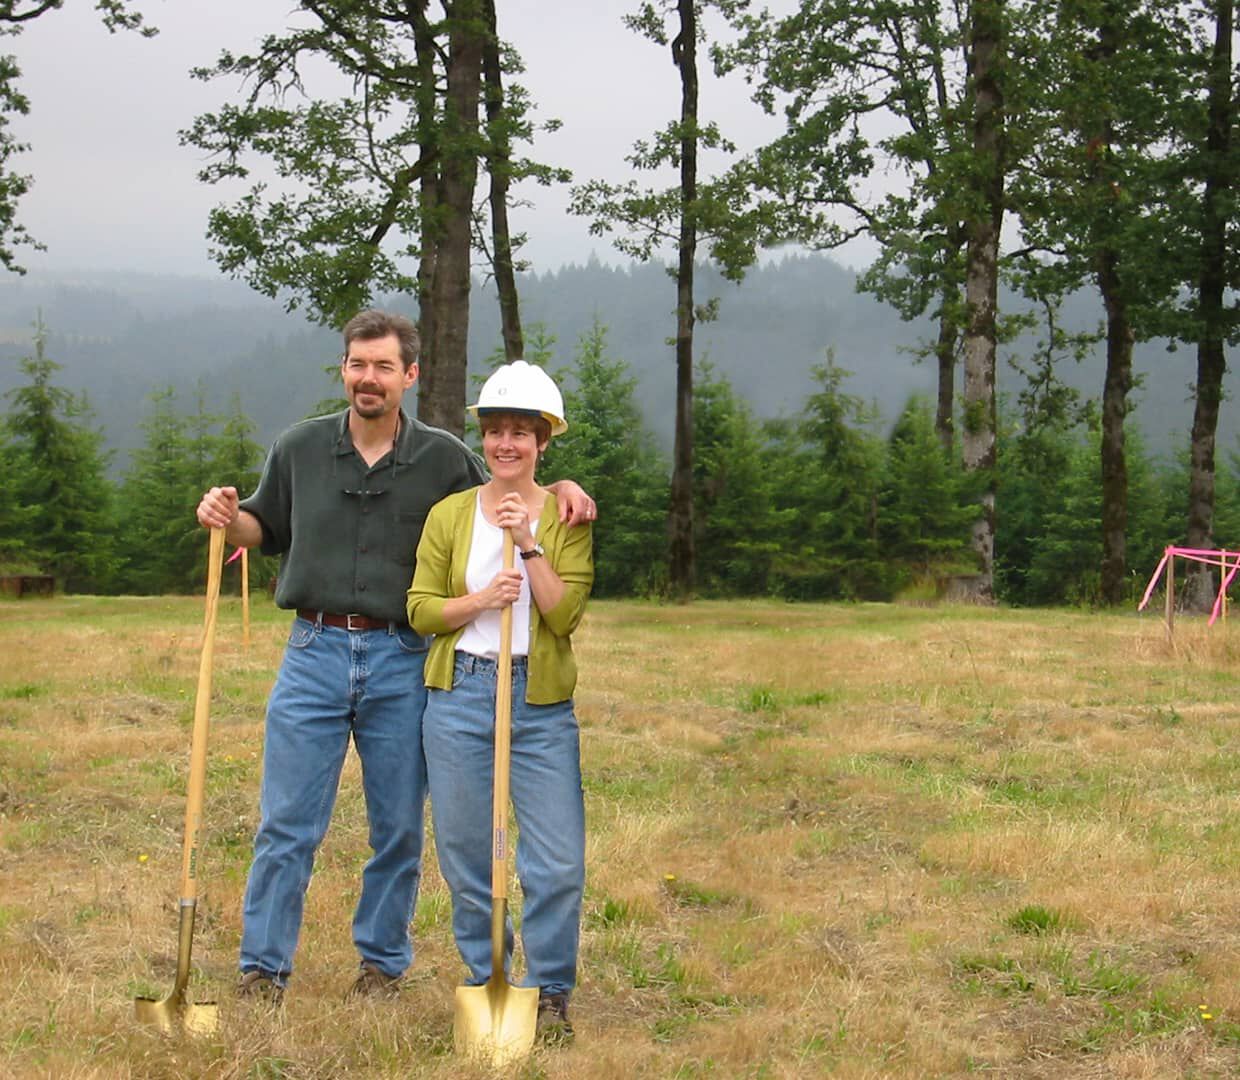 Lyn and Ron Penner posing with shovels and hard hats on.